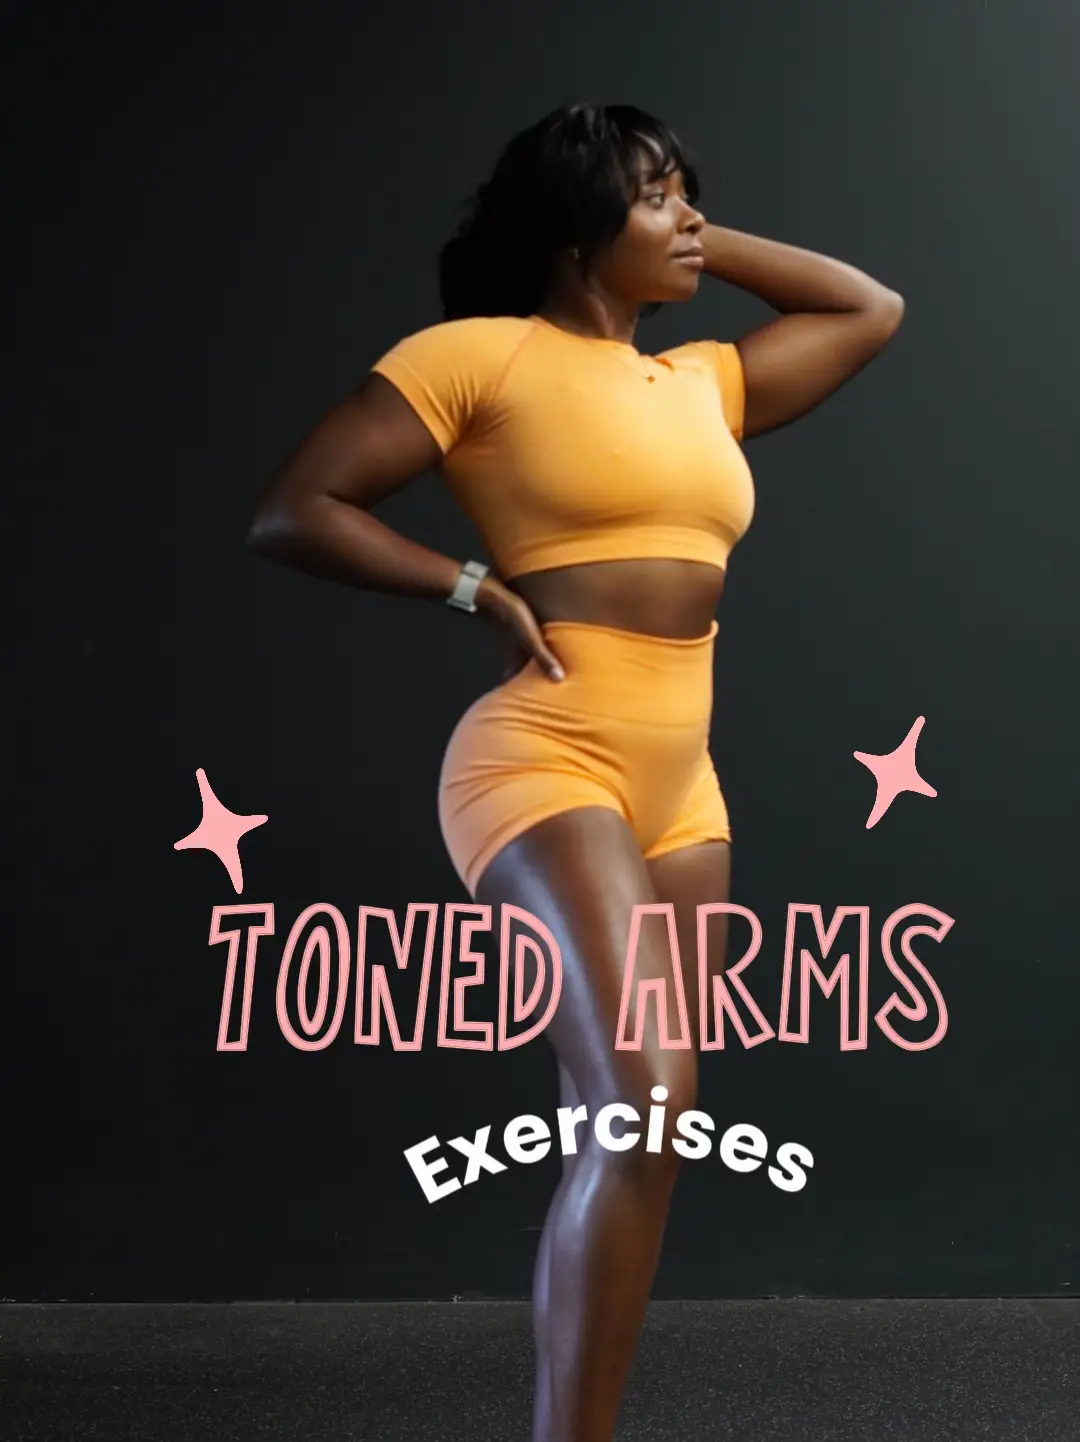 If you're looking to tone your arms try this! 💪🏽🔥💪🏽 It's a